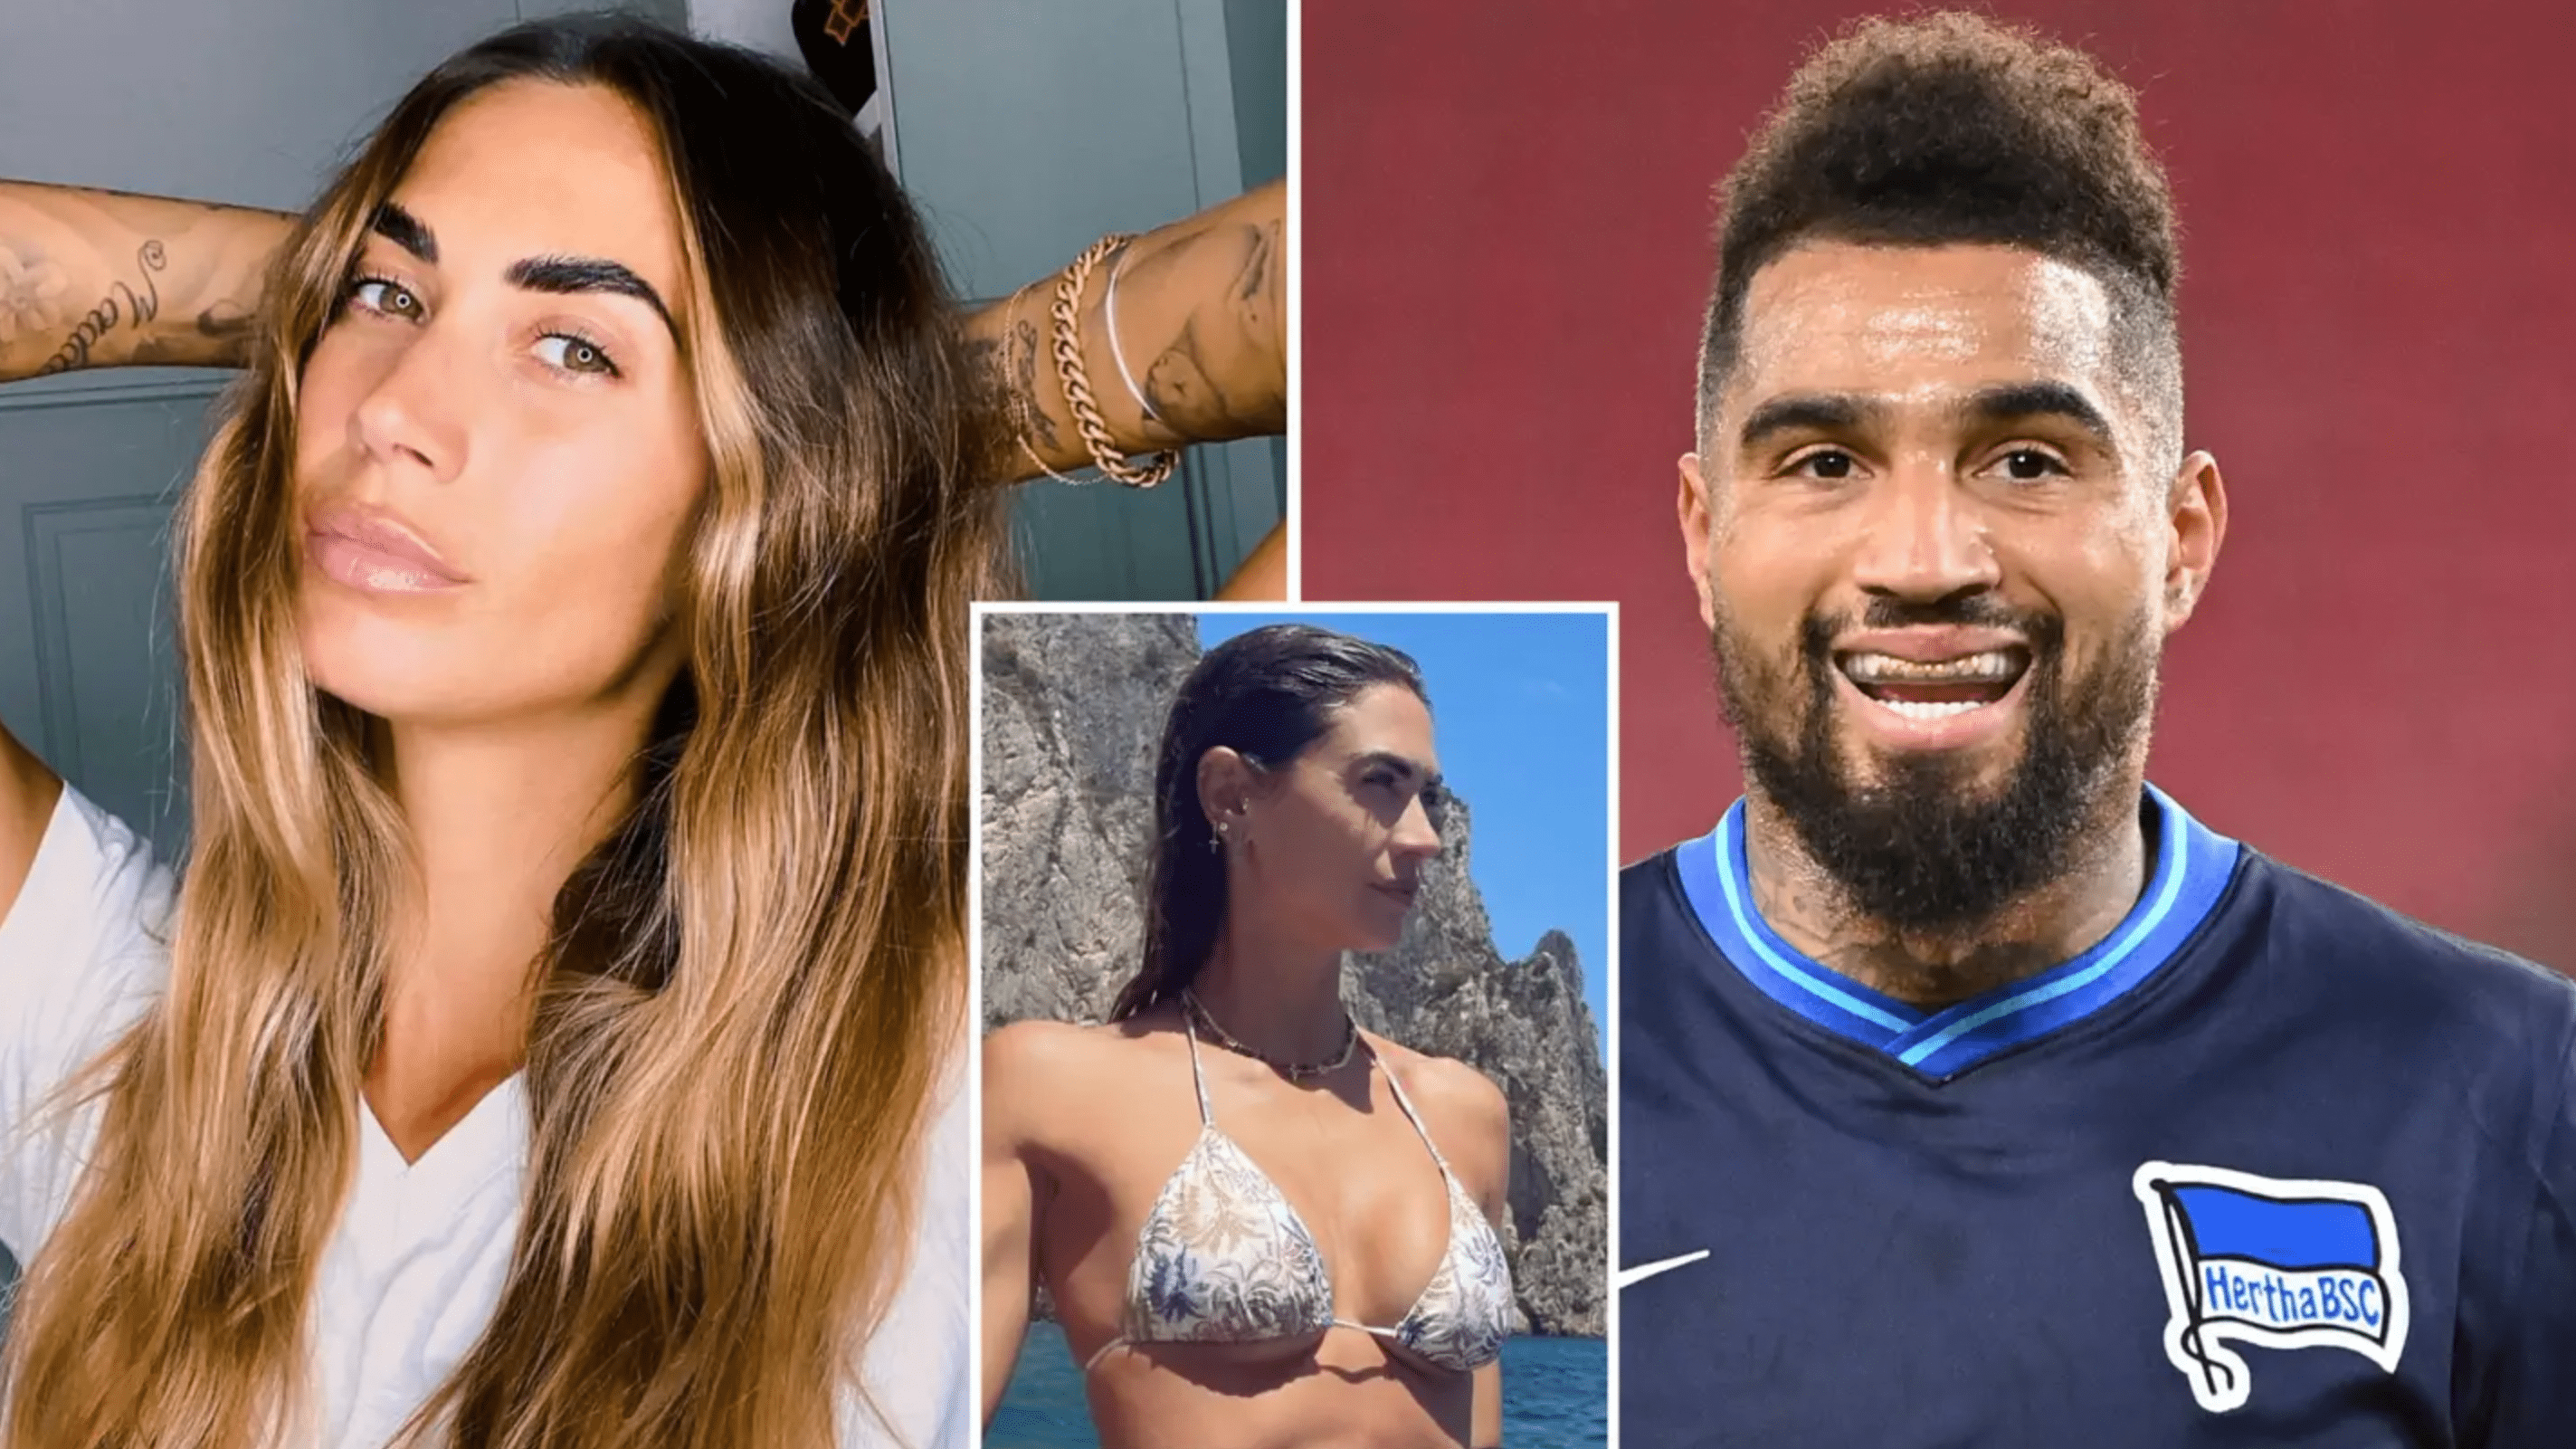 He was injury-prone because we had sex 7–10 times a week': Ex-wife of Kevin Prince Boateng